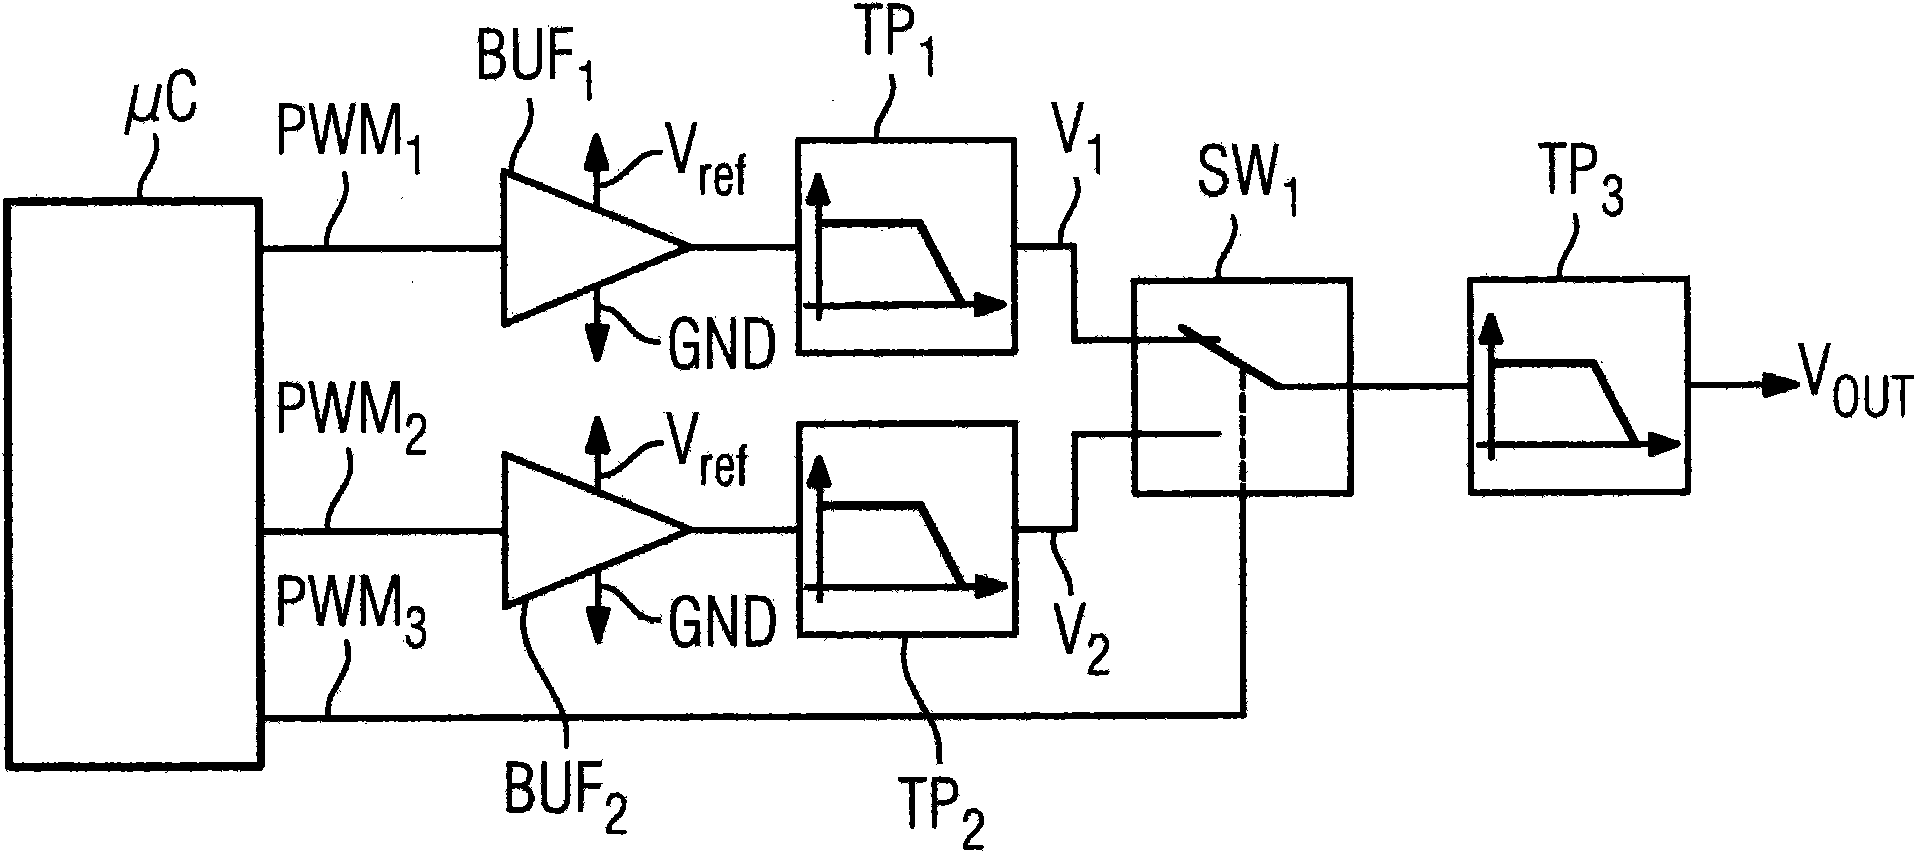 Field device having an analog output